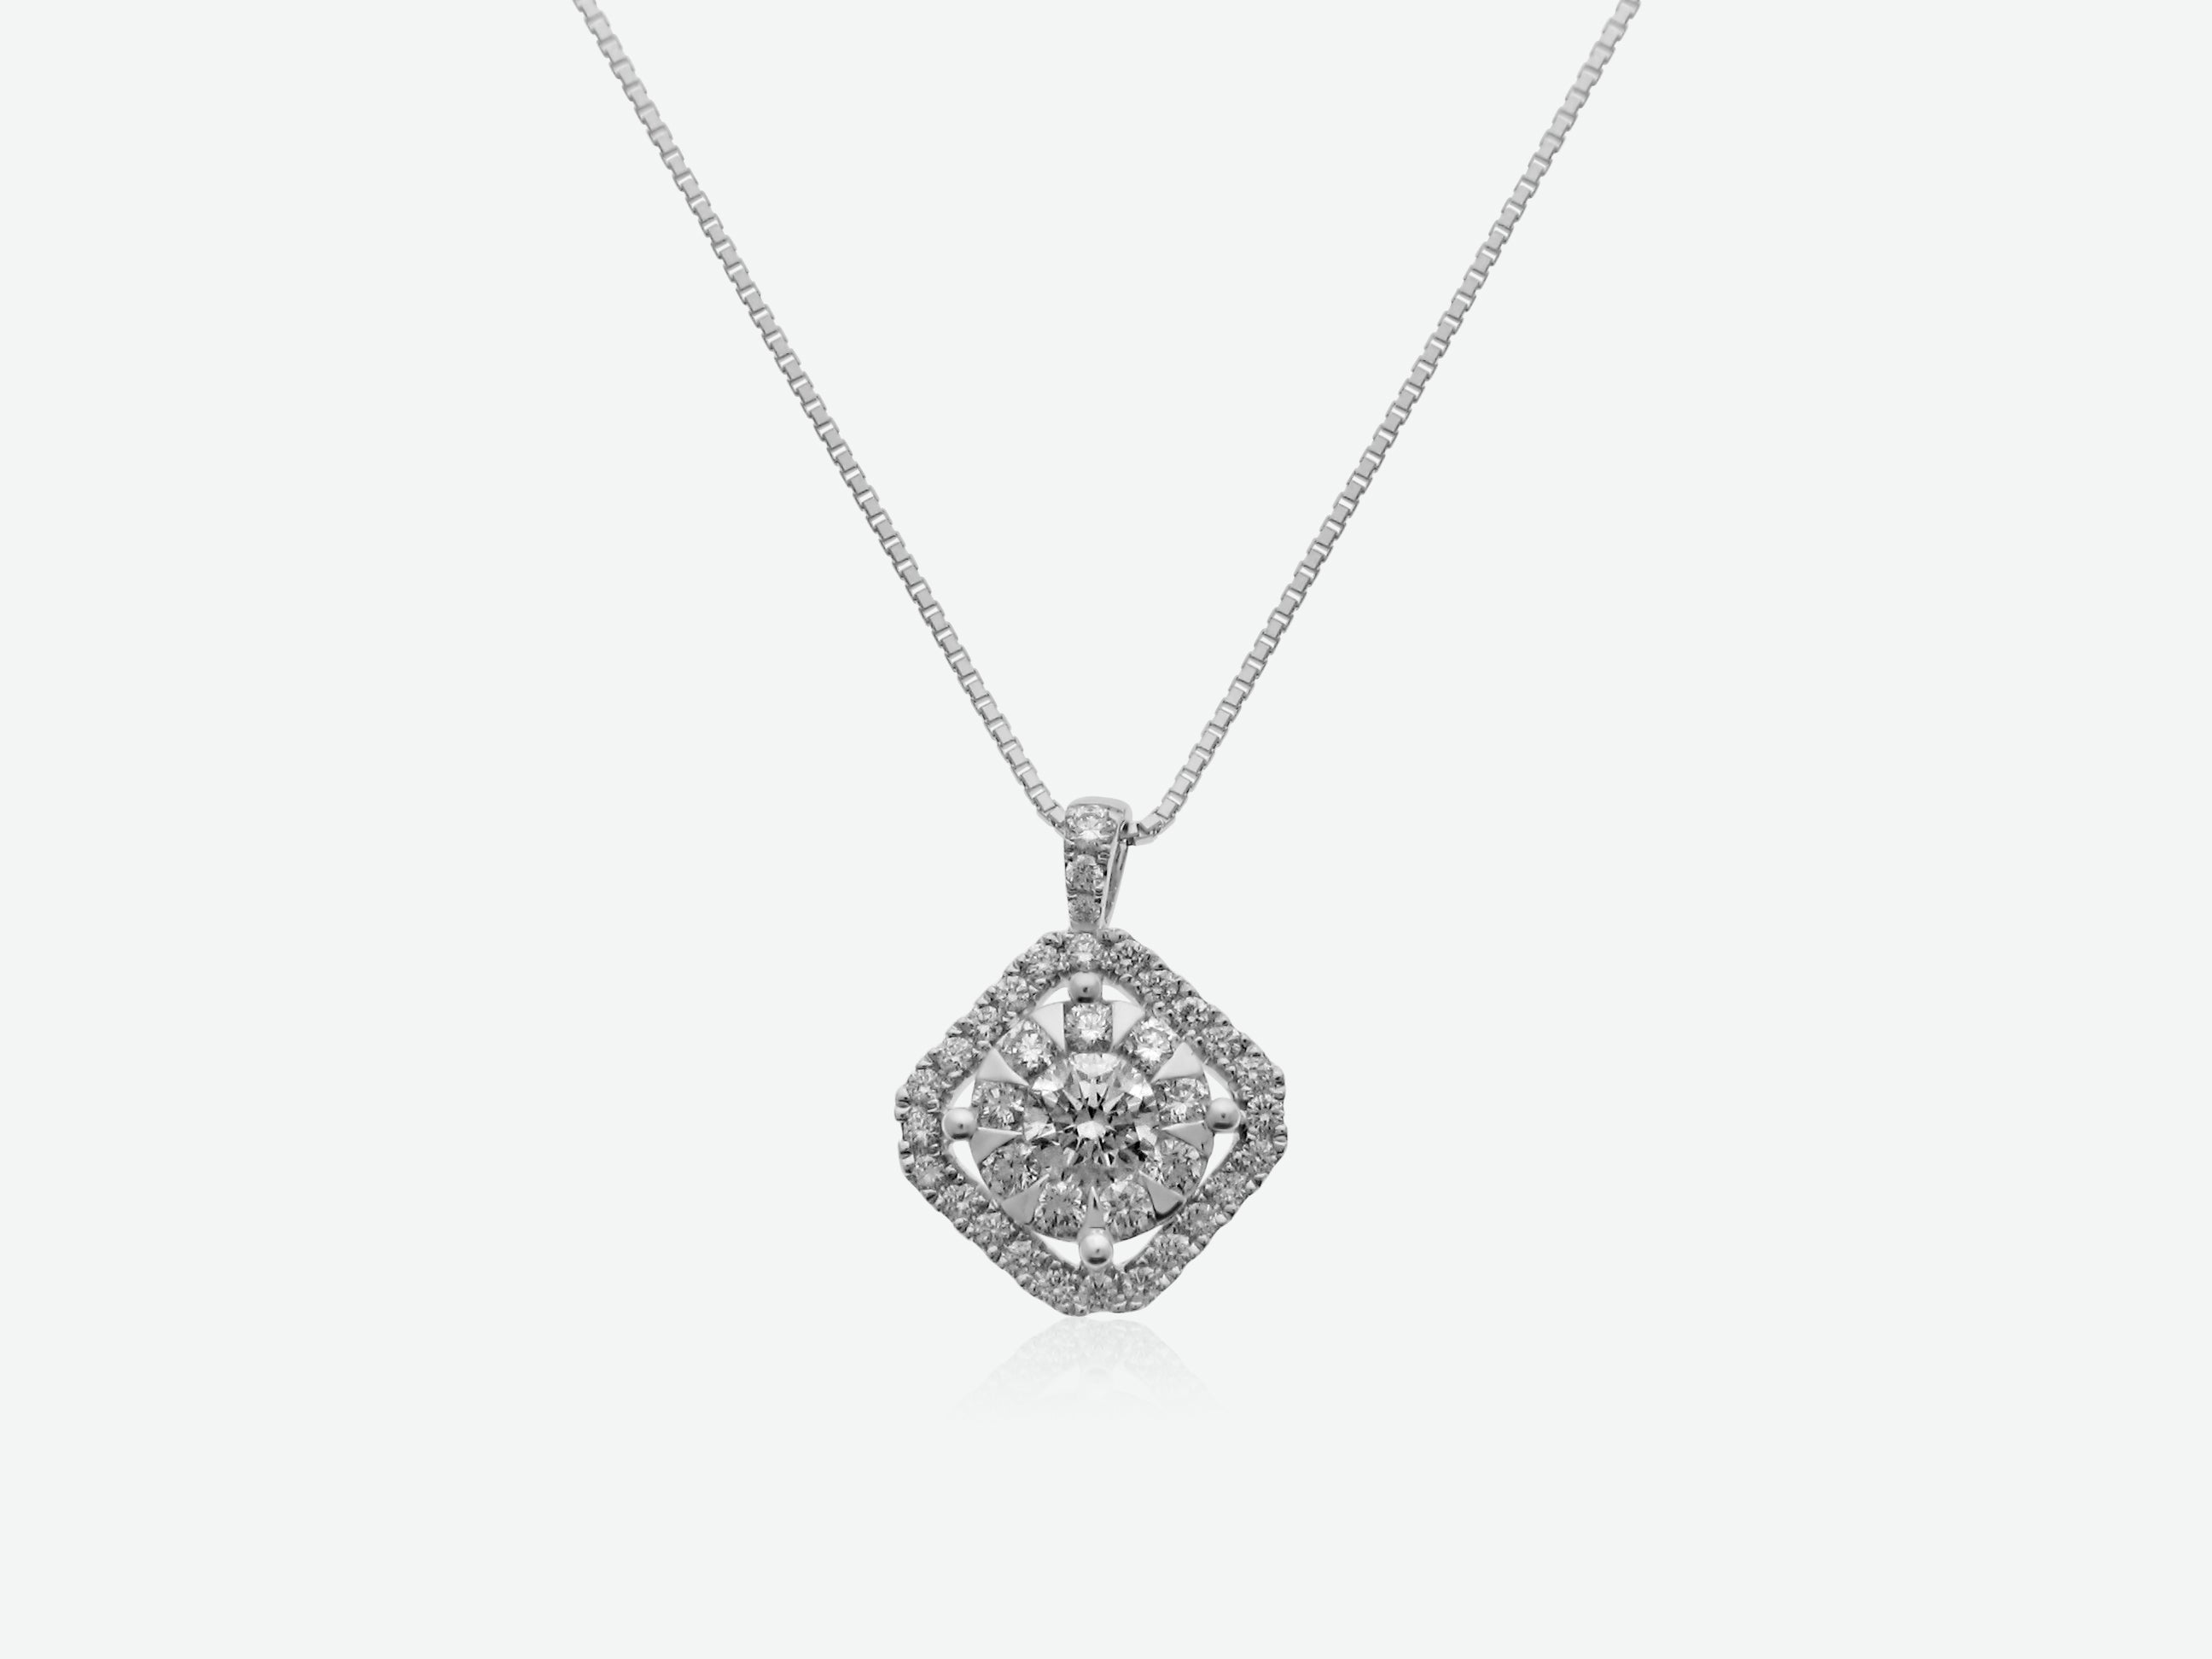 MEMOIRE 18K WHITE GOLD 0.75CT SI/G DIAMOND PENDANT FROM THE BOUQUET COLLECTION